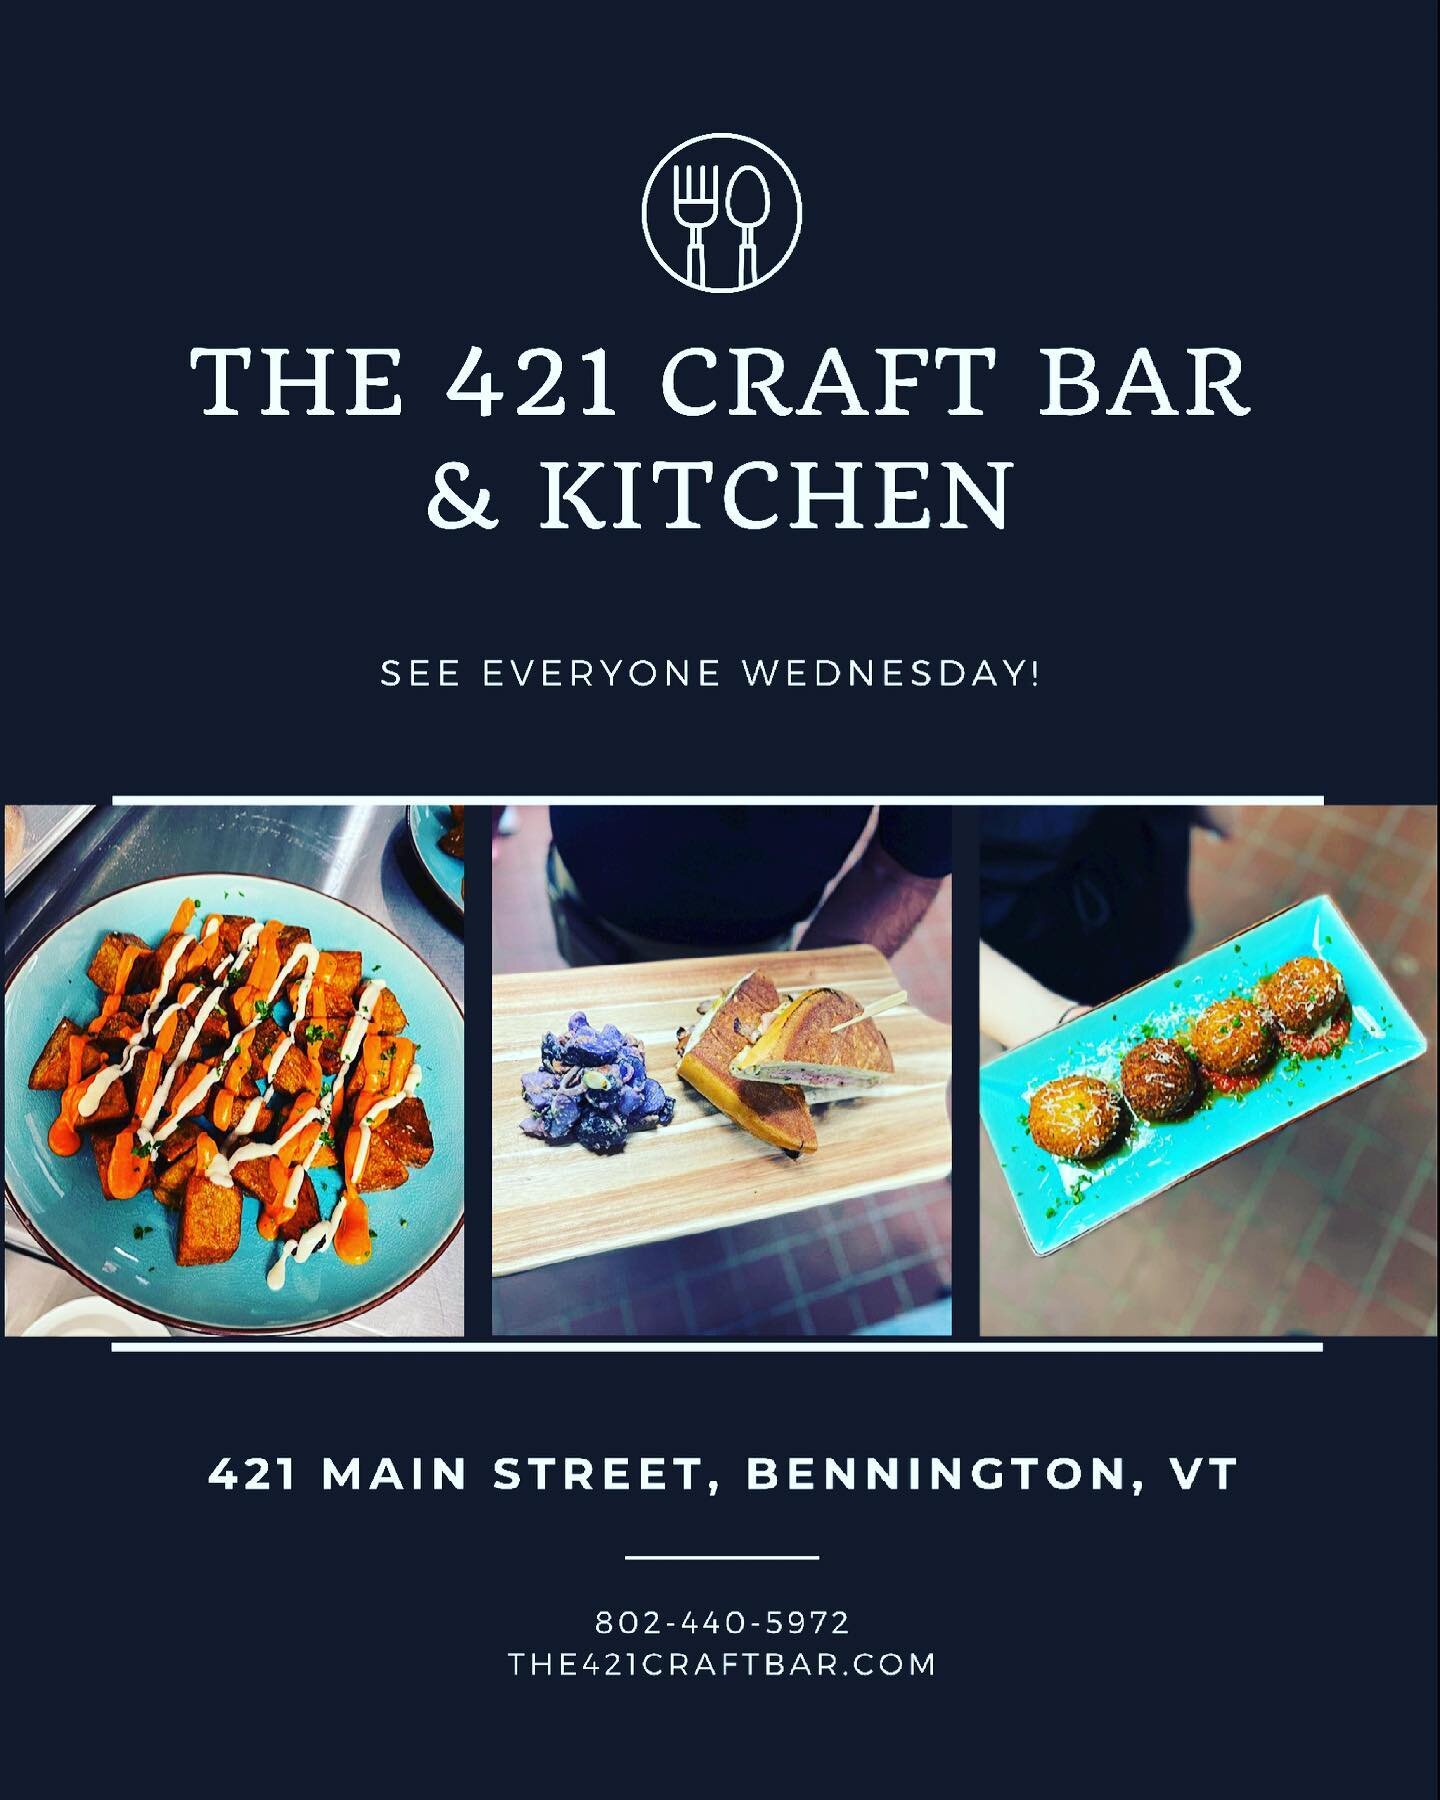 We&rsquo;ll see everyone tomorrow!! We open at 4pm!

Stop in for beer, cocktails, AND delicious food! 😀